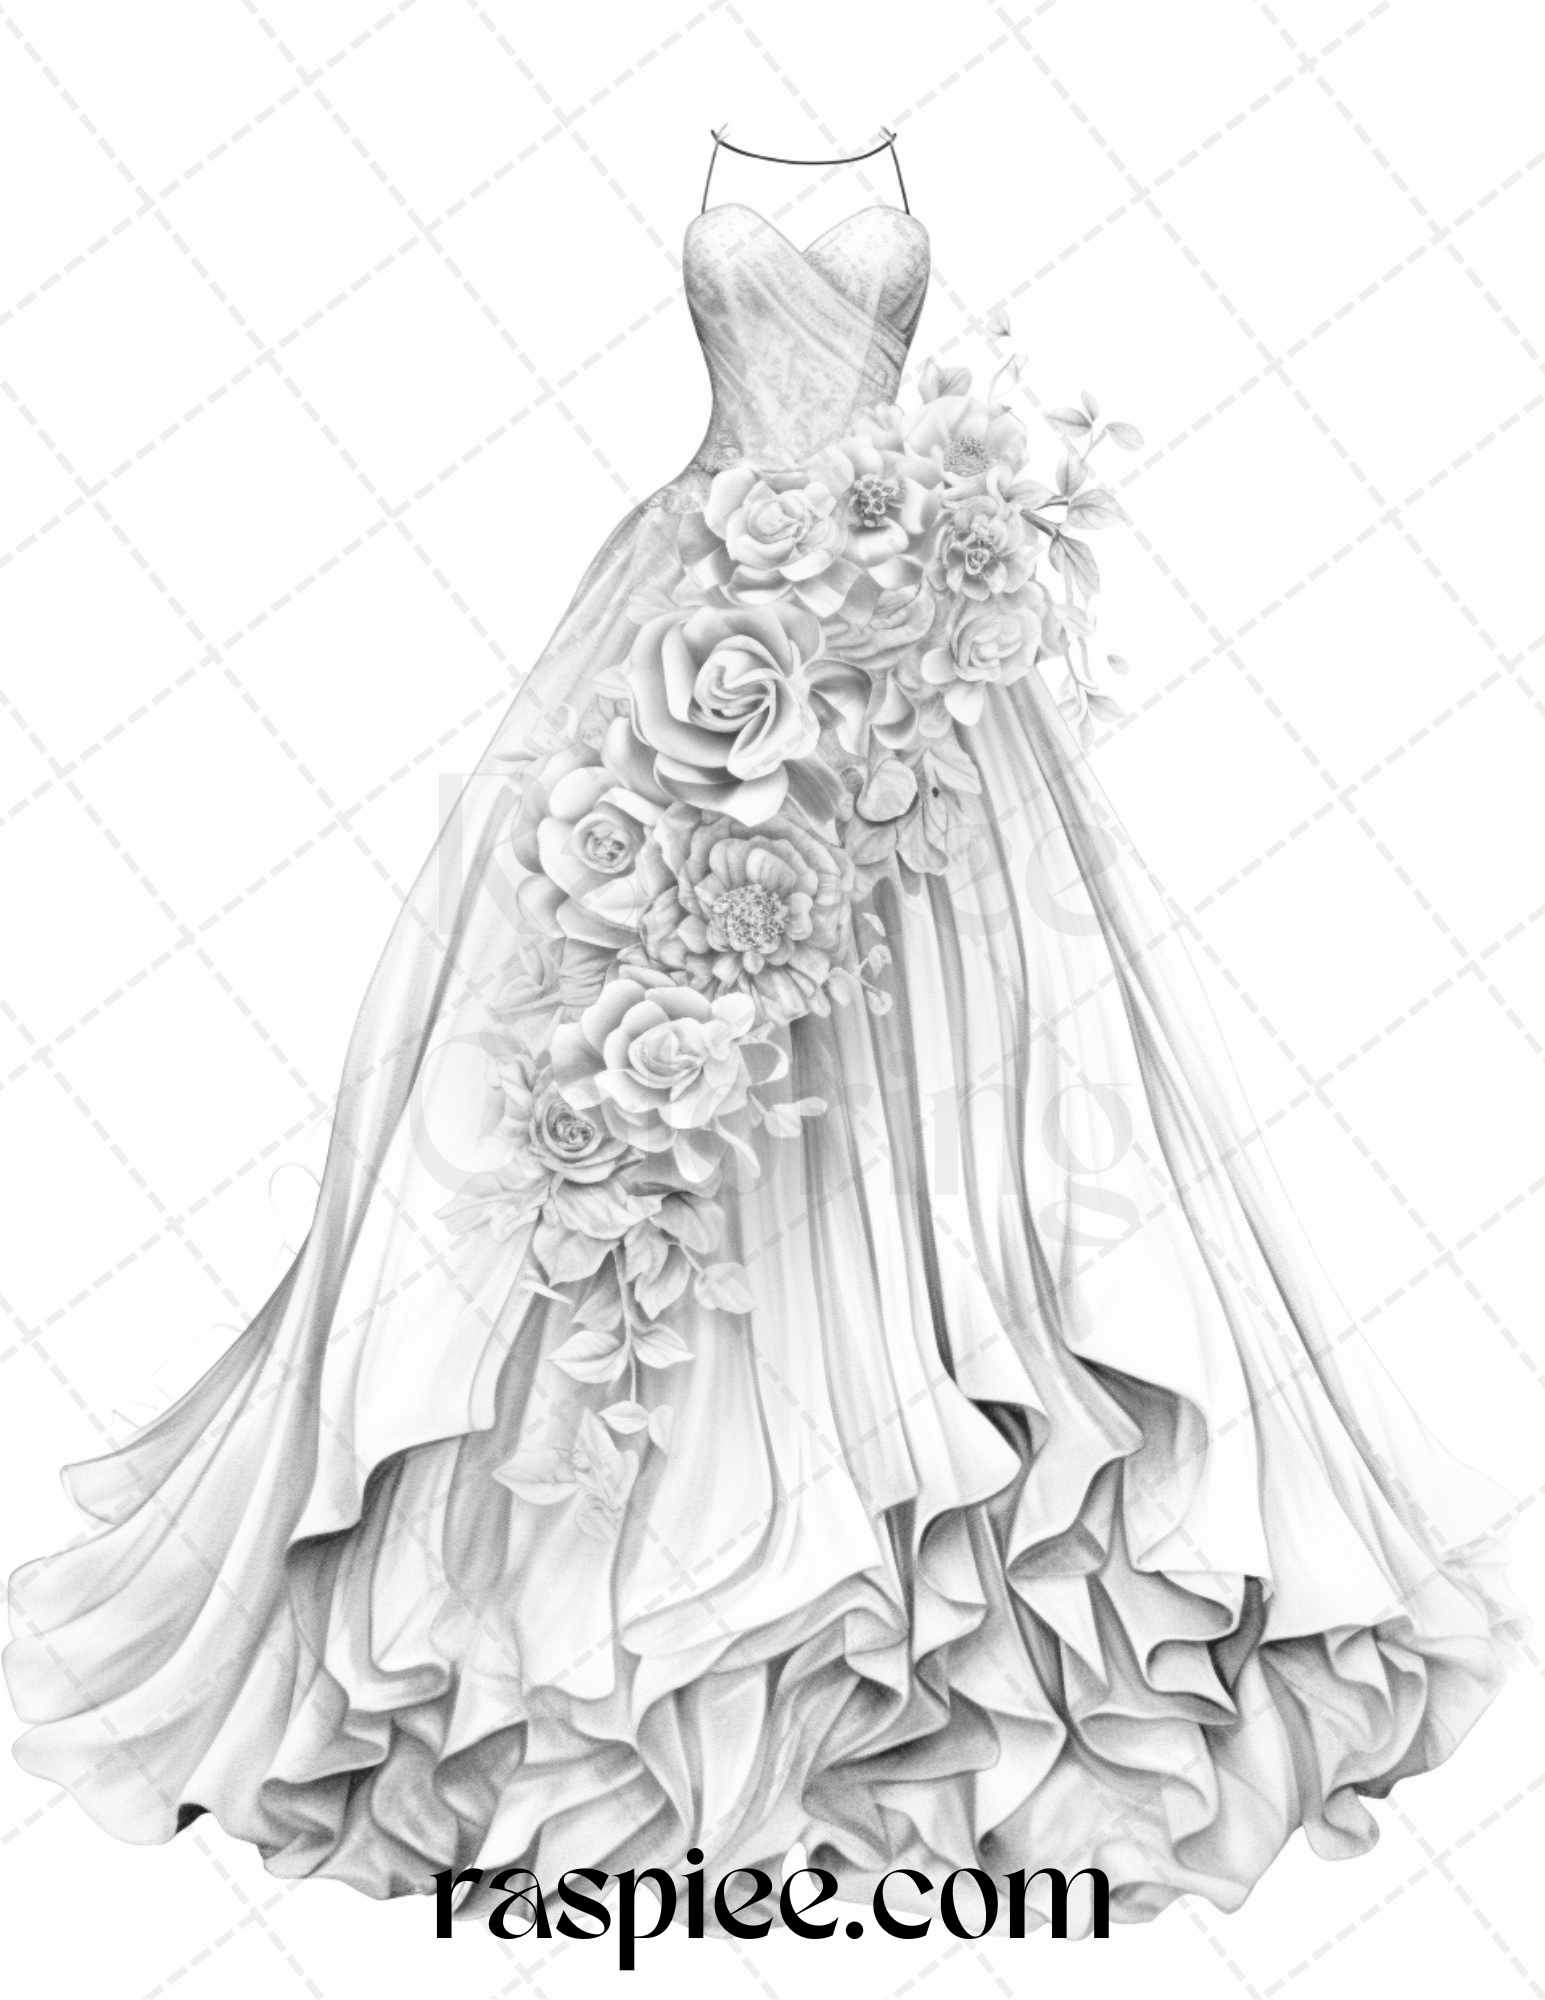 40 Elegant Floral Wedding Dresses Grayscale Coloring Pages Printable for Adults, PDF File Instant Download - Raspiee Coloring